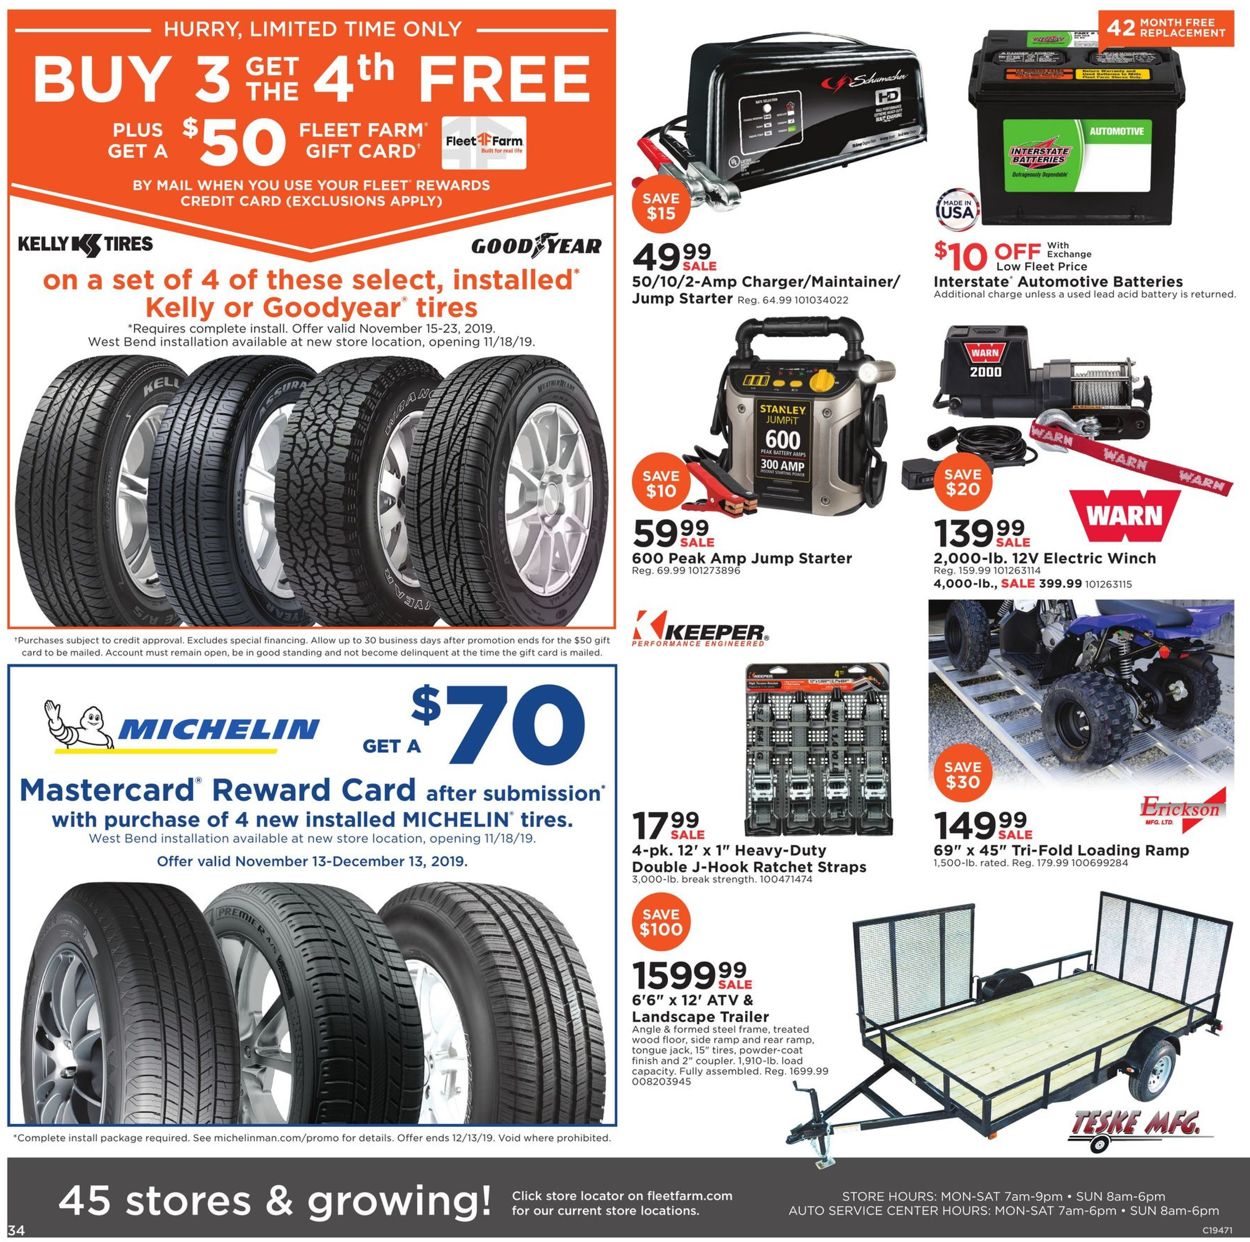 Mills Fleet Farm Current weekly ad 11/15 - 11/23/2019 [34] - frequent ...